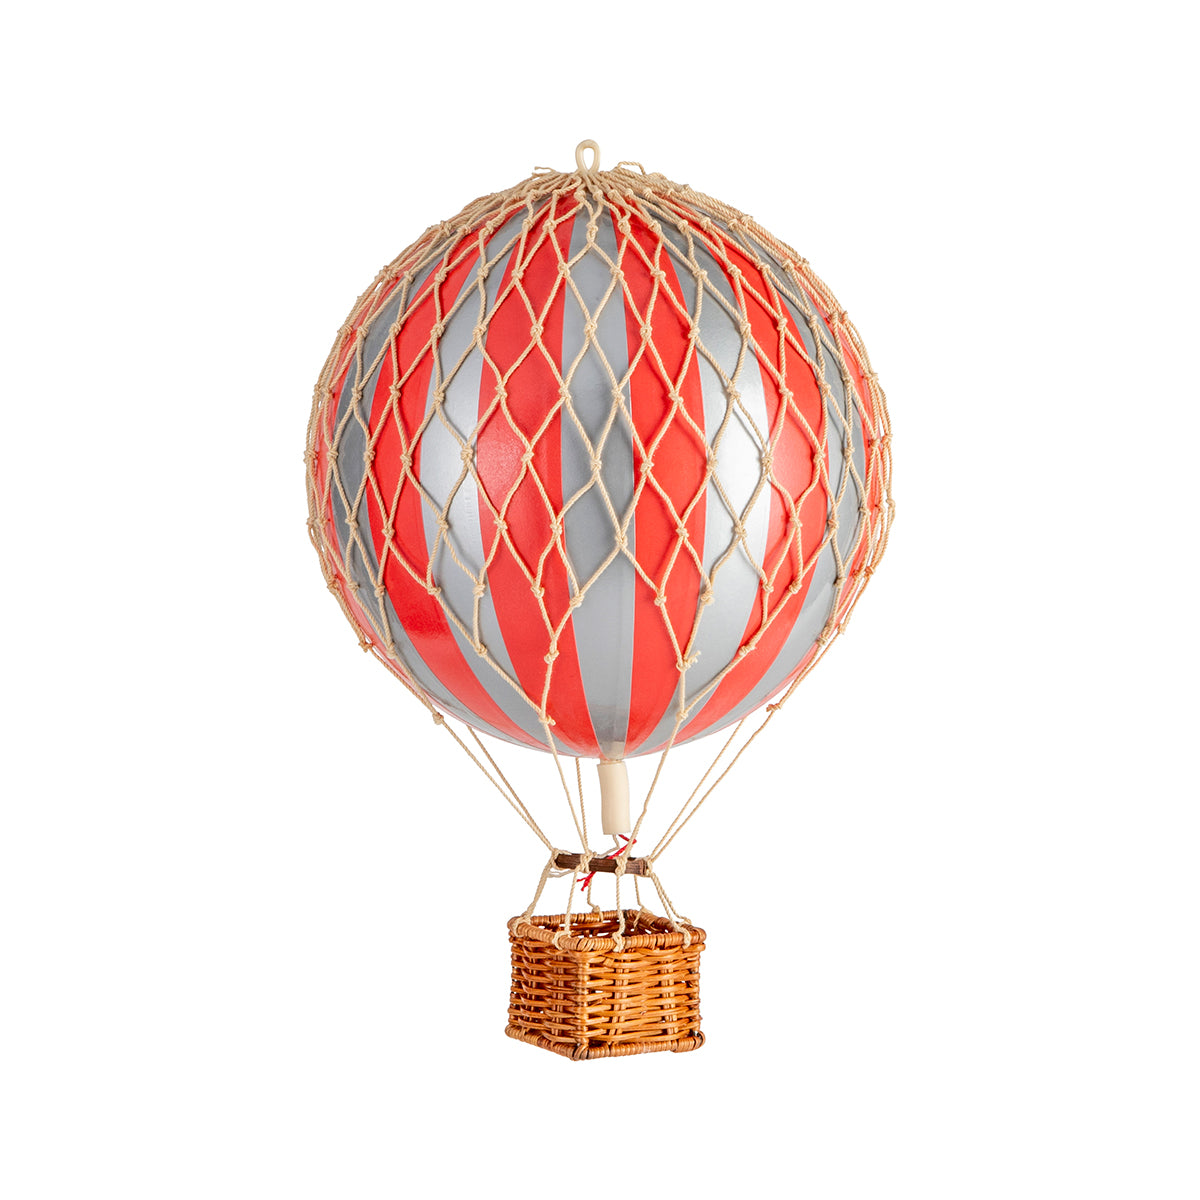 A Wonderen Small Hot Air Balloon - Travels Light in red and white floats against a plain white background.